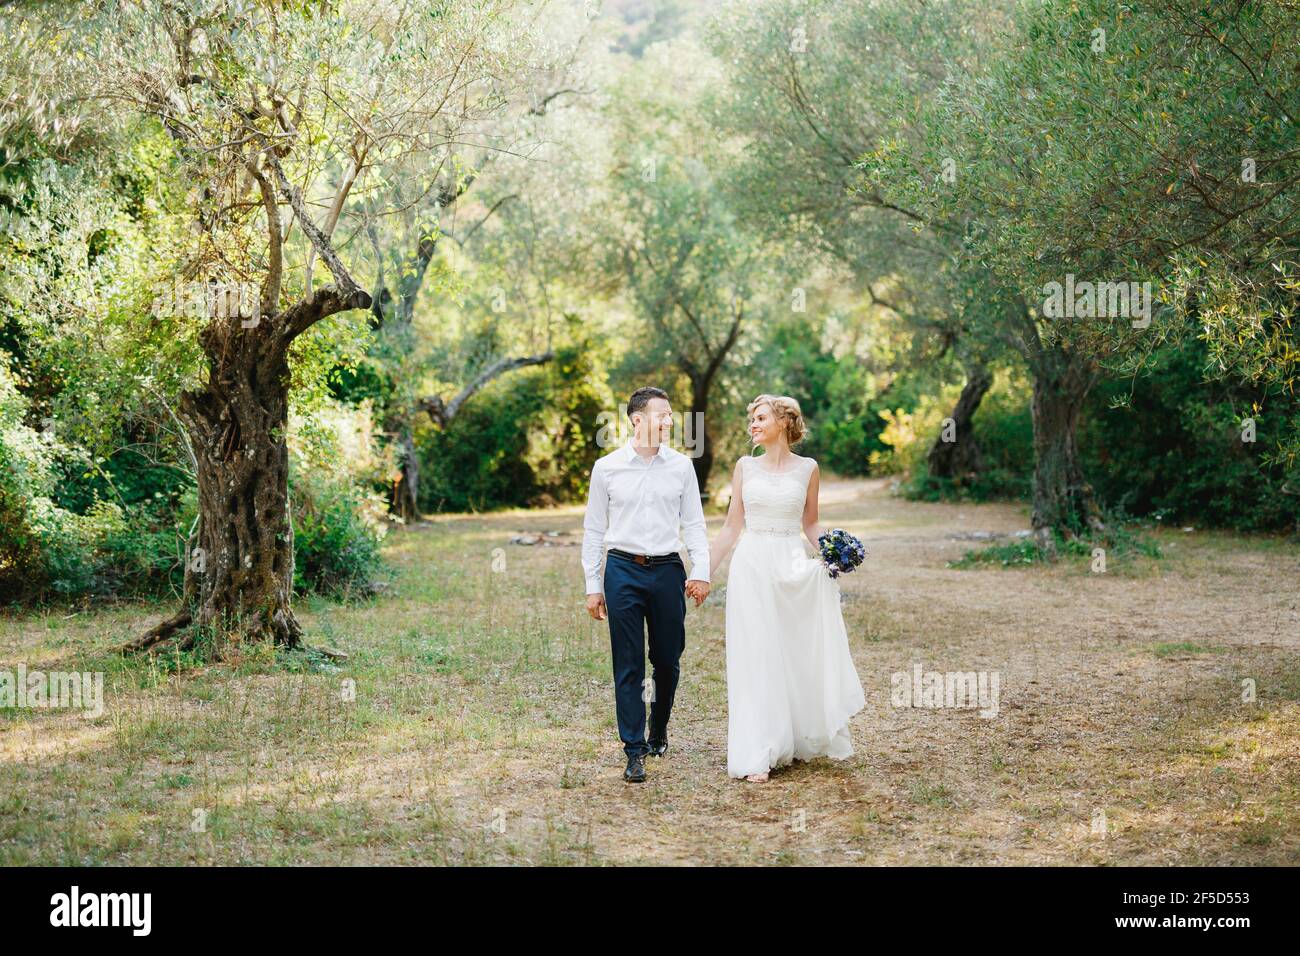 Bride with a bouquet of blue flowers and the groom walk side by side in the olive grove and hold hands Stock Photo